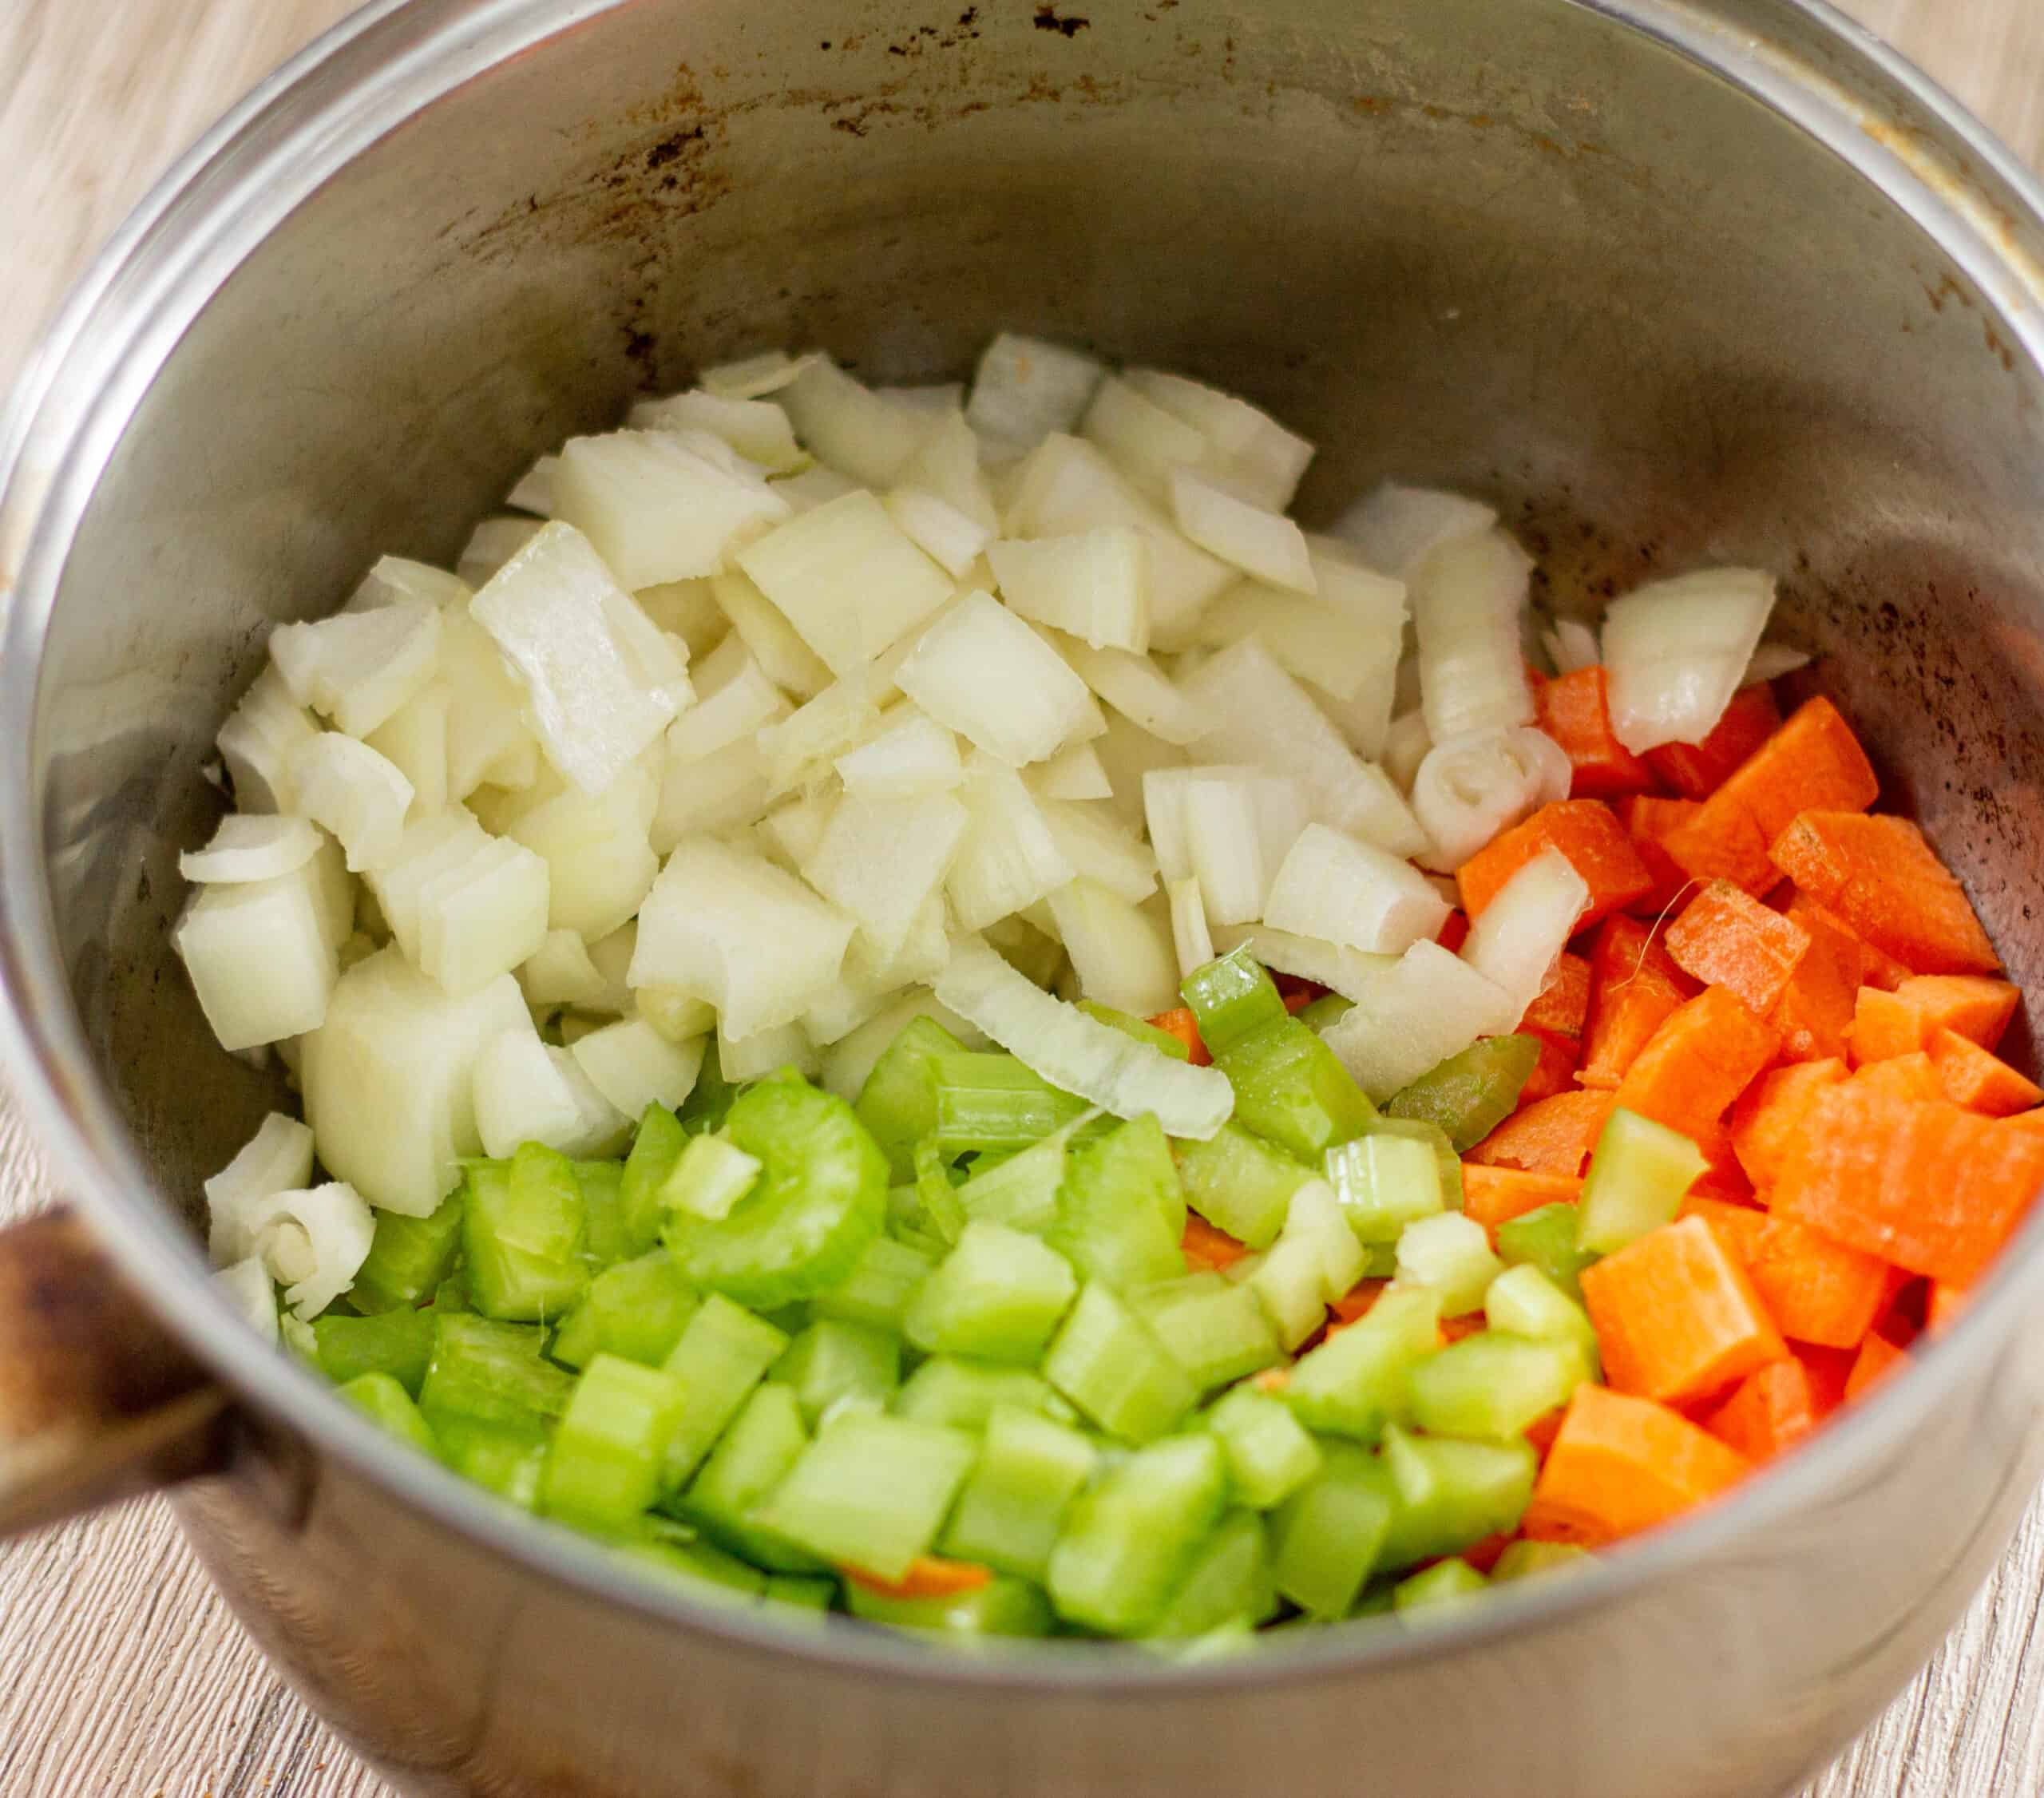 Onions, celery and carrots in a saucepan